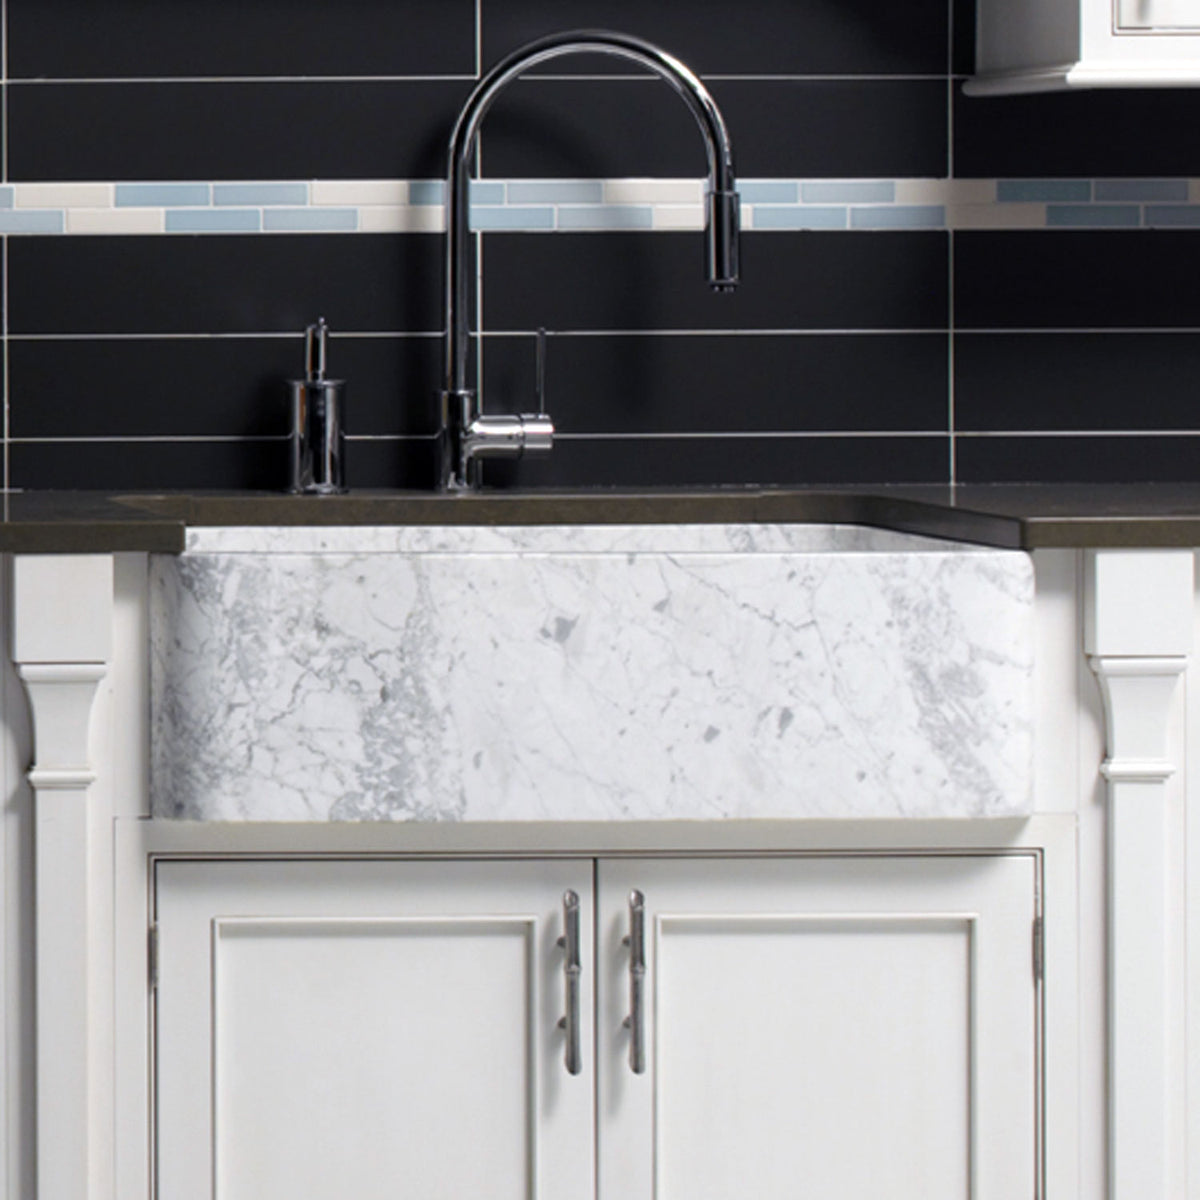 Polished Front Farmhouse Sink carved from carrara marble image 3 of 3